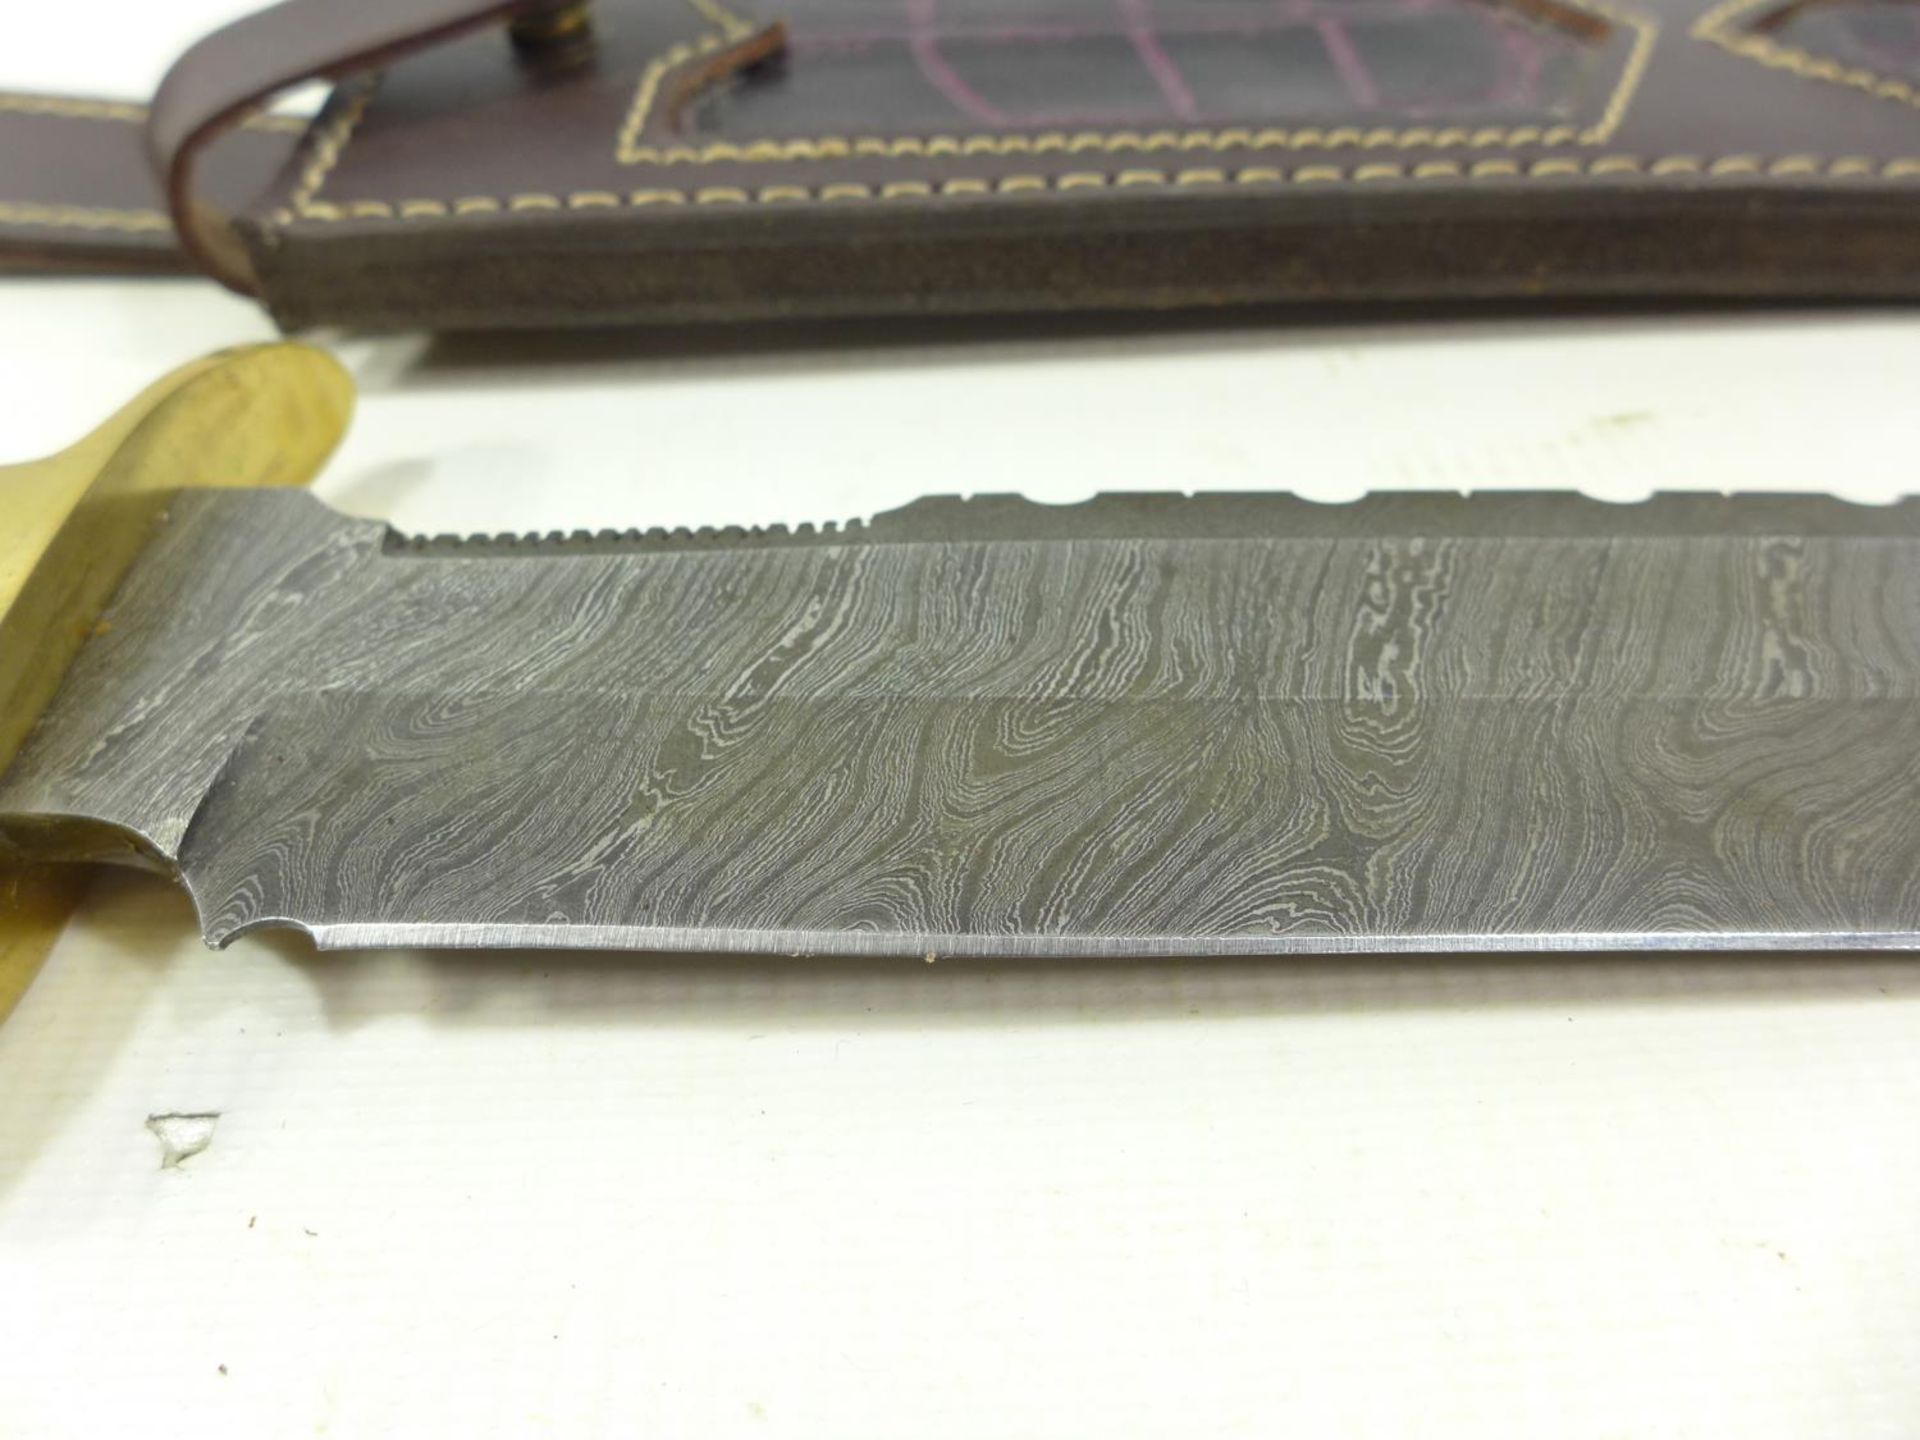 A LARGE WELL MADE HUNTING KNIFE AND SCABBARD 28 CM DAMASCUS BLADE - Image 2 of 5